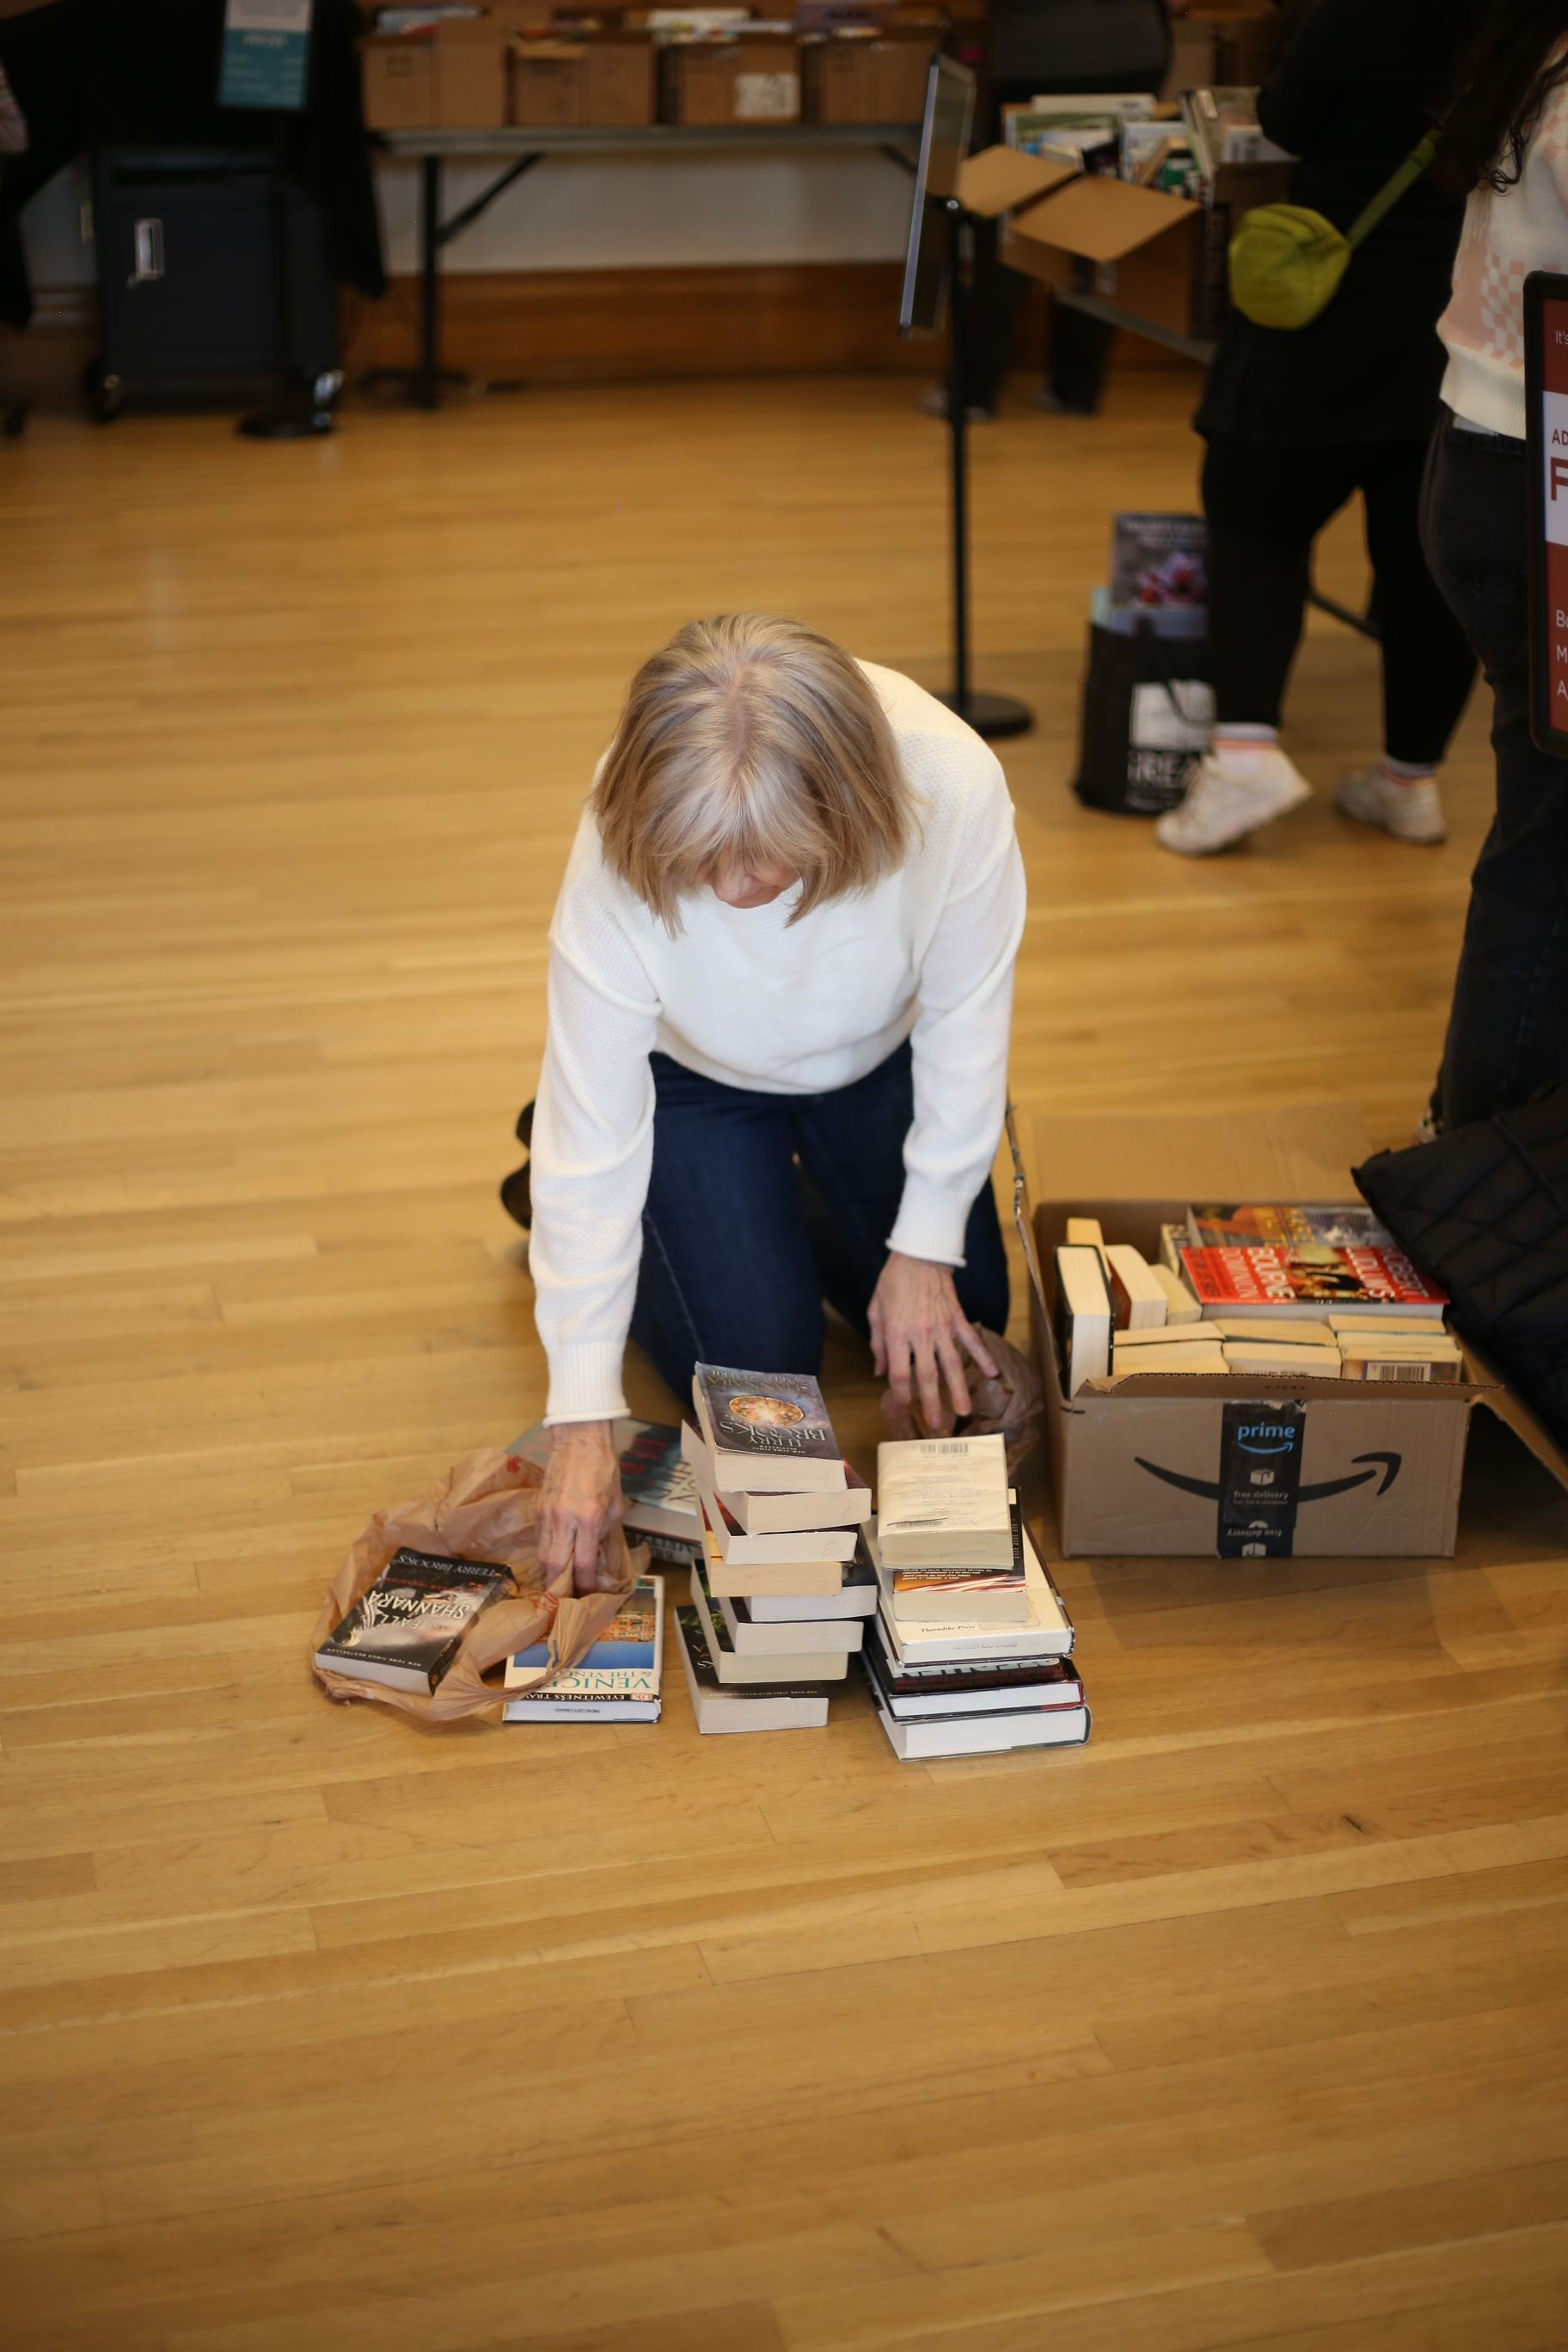 Individuals load boxes full of books at the Provo Library used book sale. (McKenna Jensen)